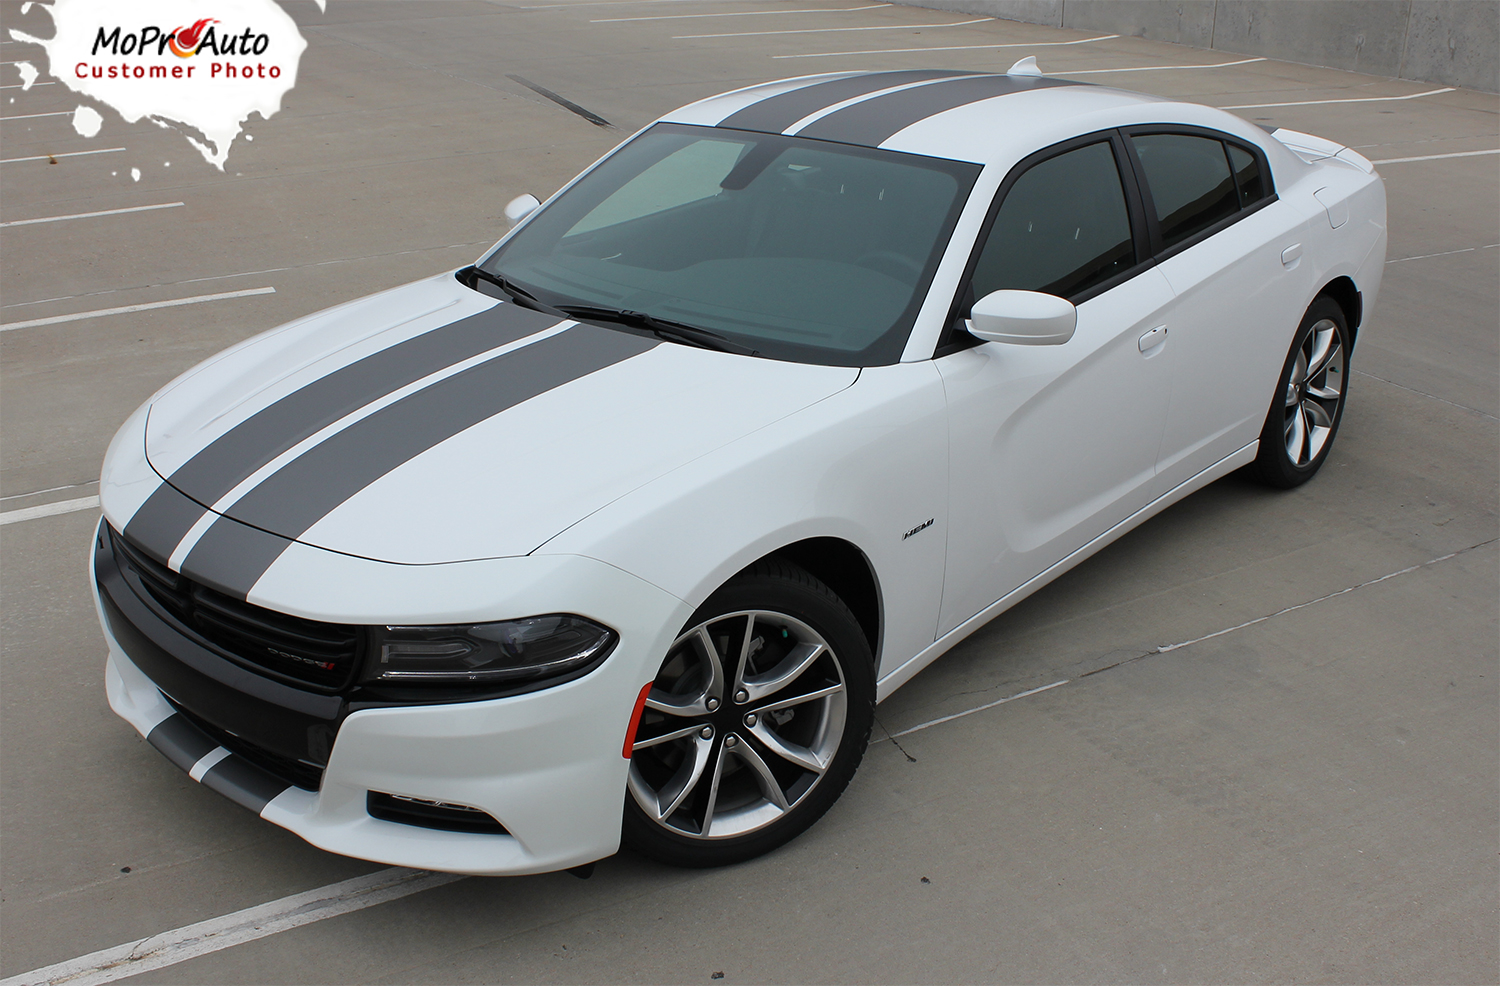 2015, 2016, 2017, 2018, 2019, 2020, 2021, 2022, 2023 Rally Racing Stripes Dodge Charger Vinyl Graphics, Striping and Decals Set